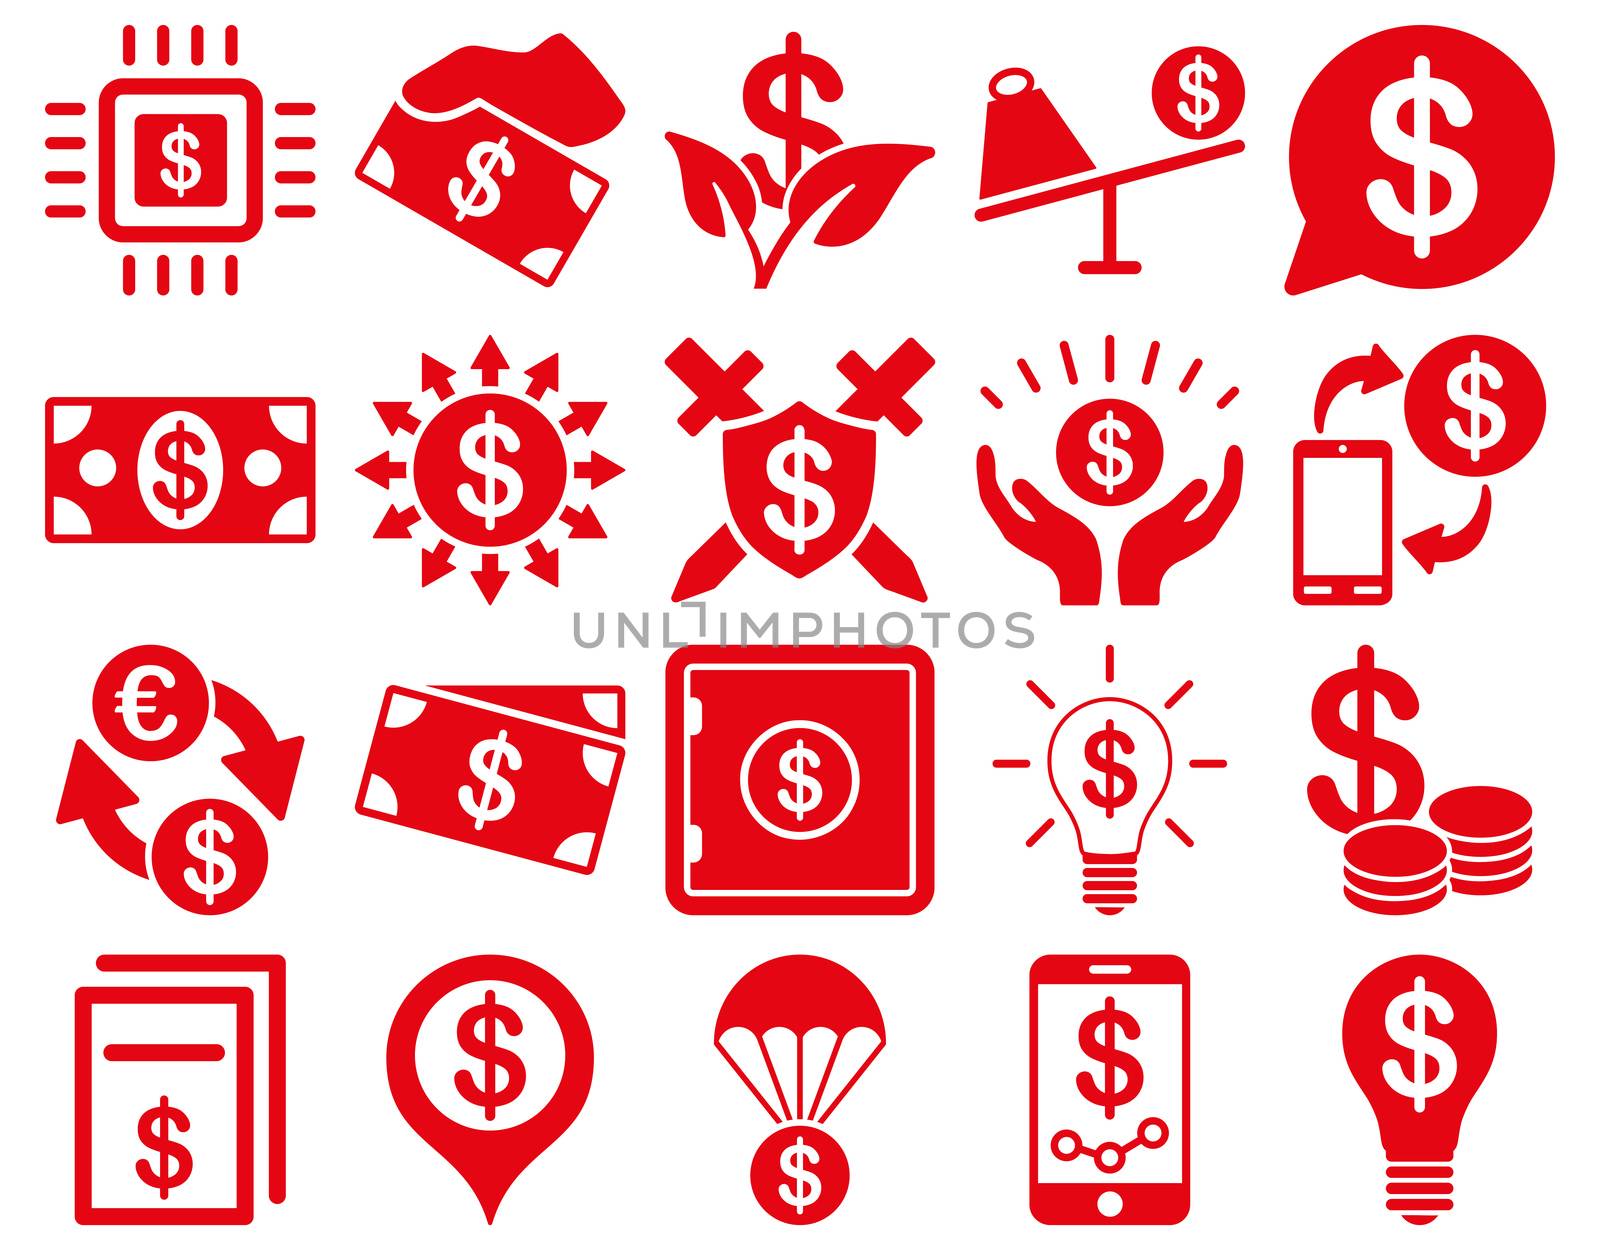 Dollar Icon Set. These flat icons use red color. Raster images are isolated on a white background.